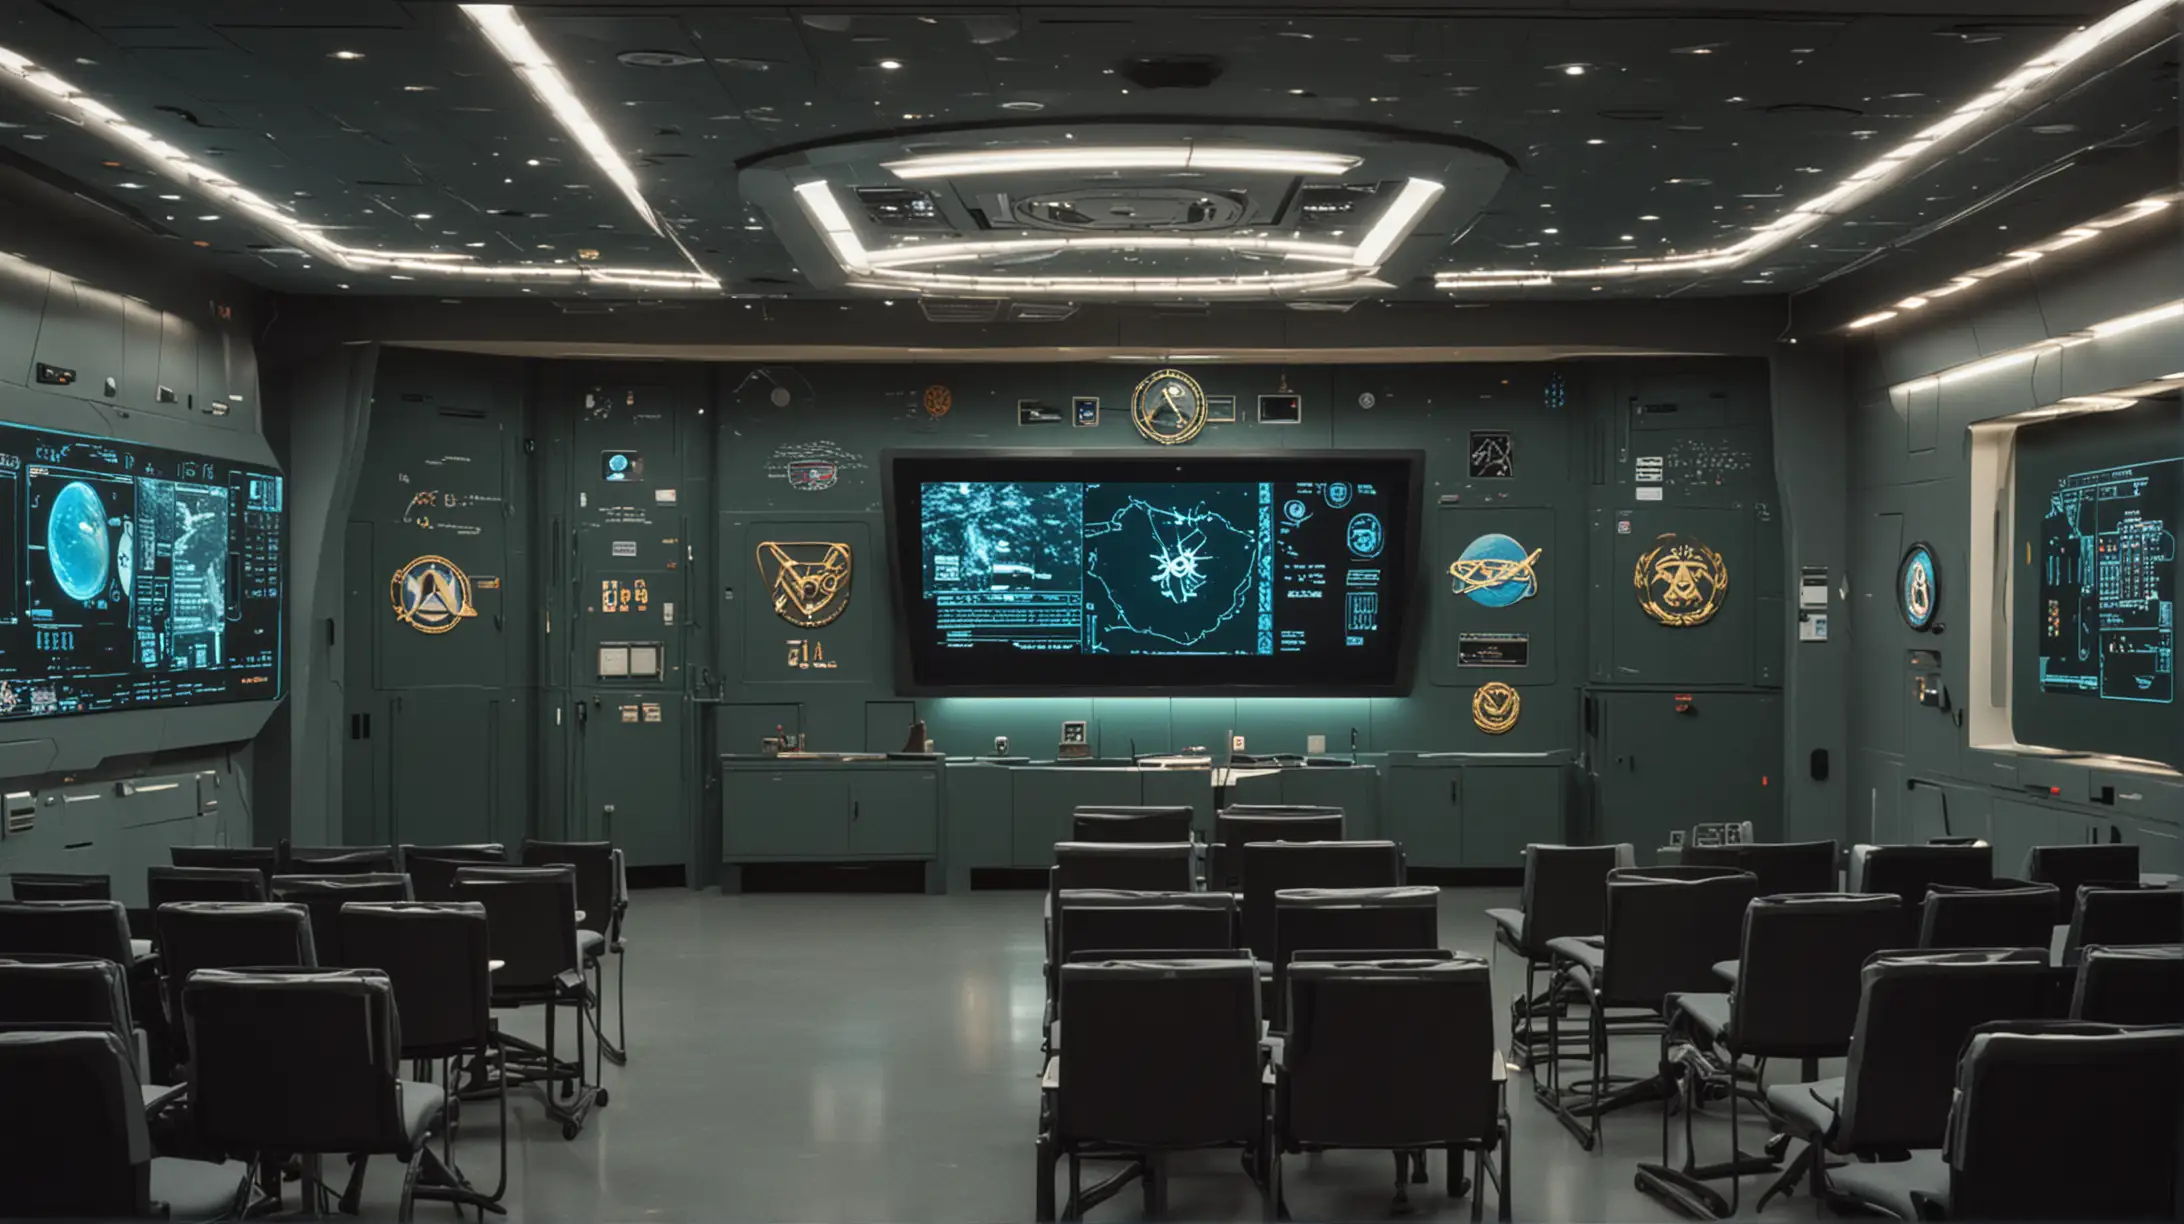 Futuristic Military Classroom with Space Command Symbol